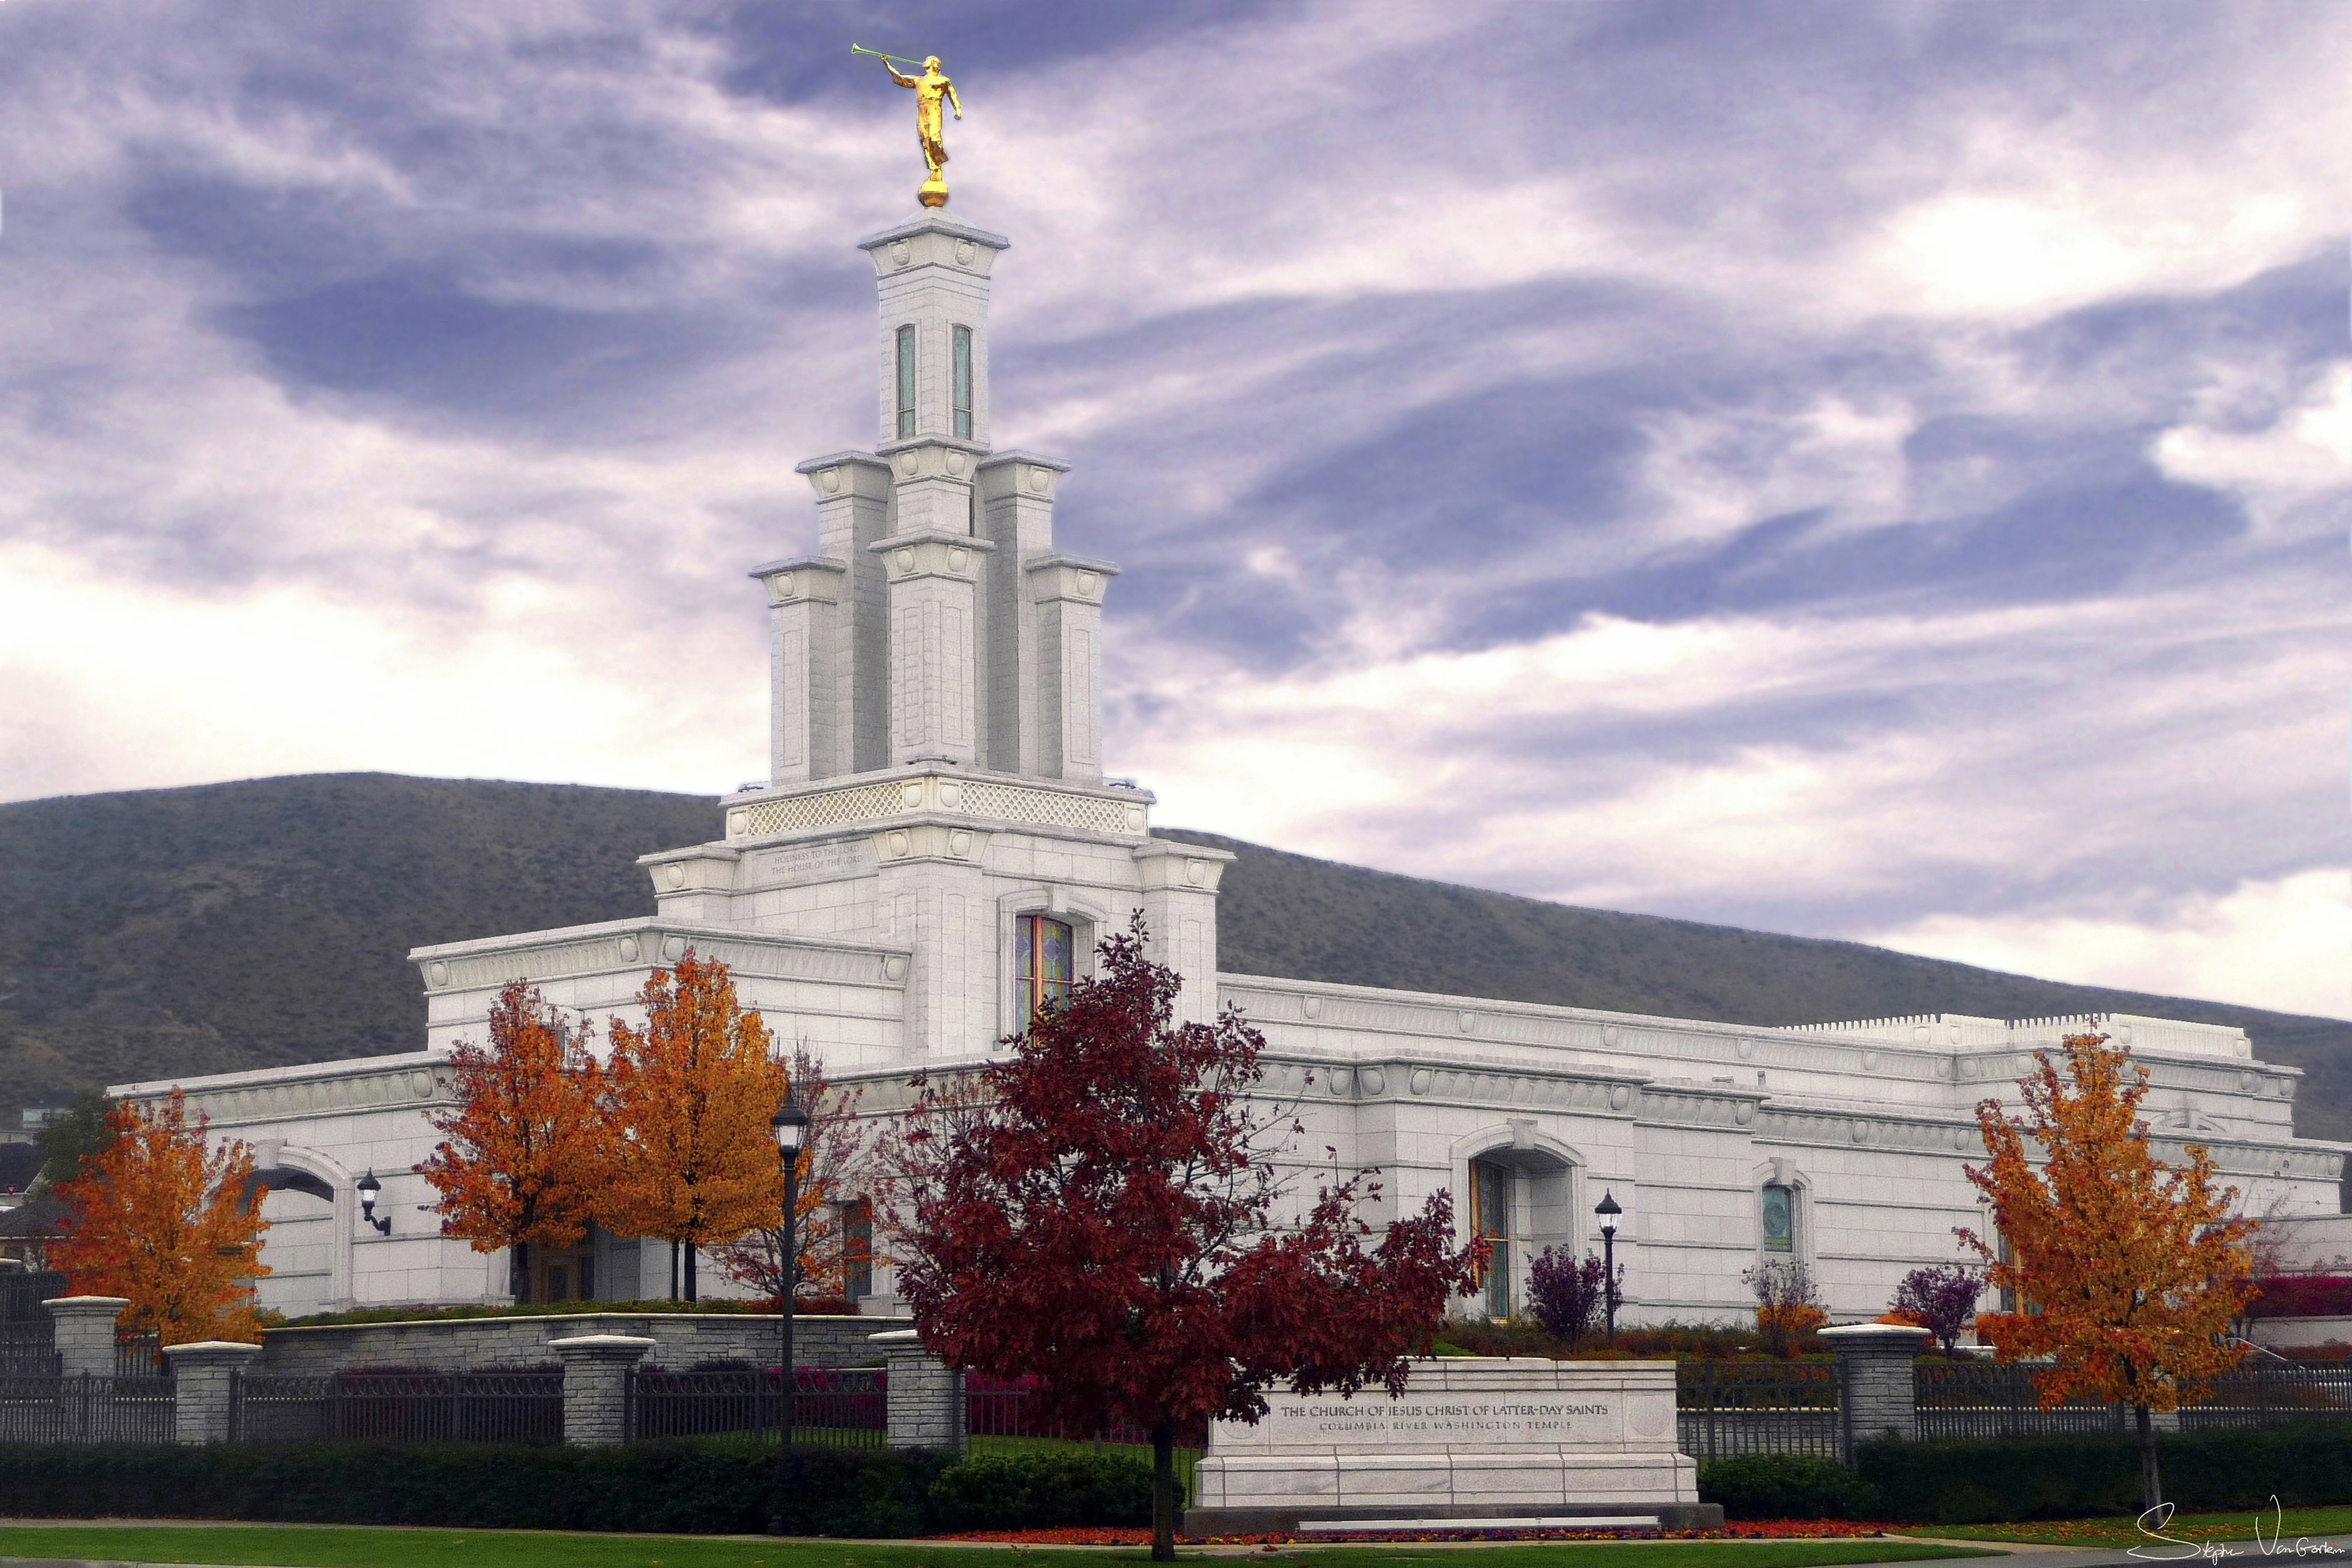 The trees on the grounds of the Columbia River Washington Temple change color in the fall.  